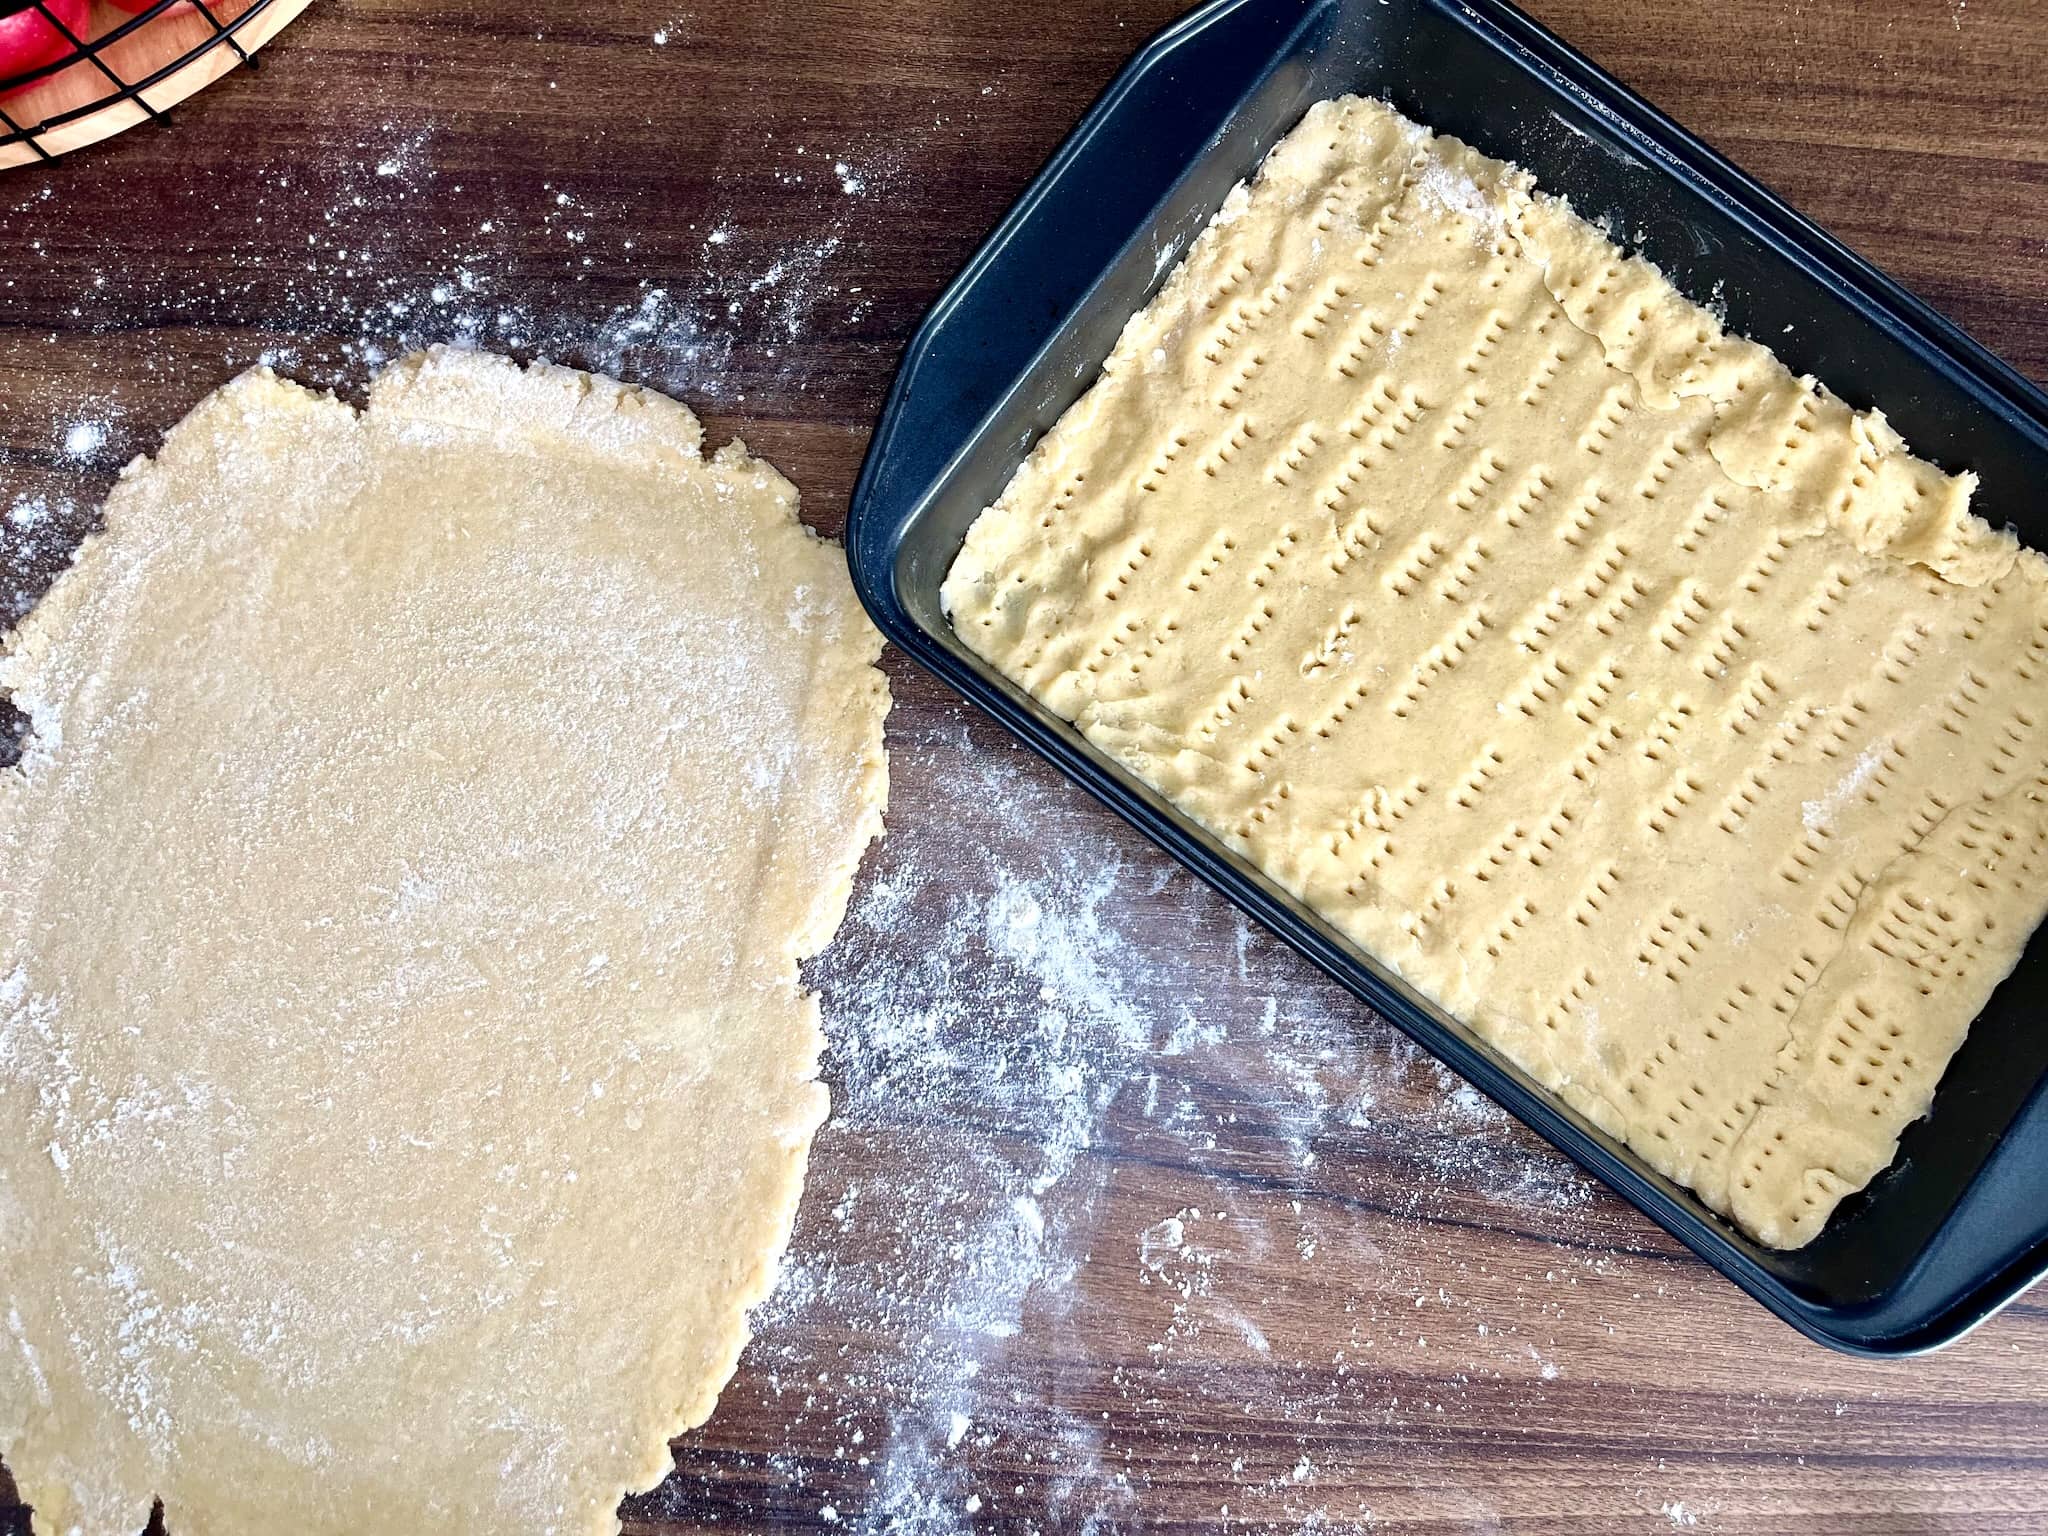 Portion of the dough is pressed into a greased baking tin, while the other remains on a floured surface